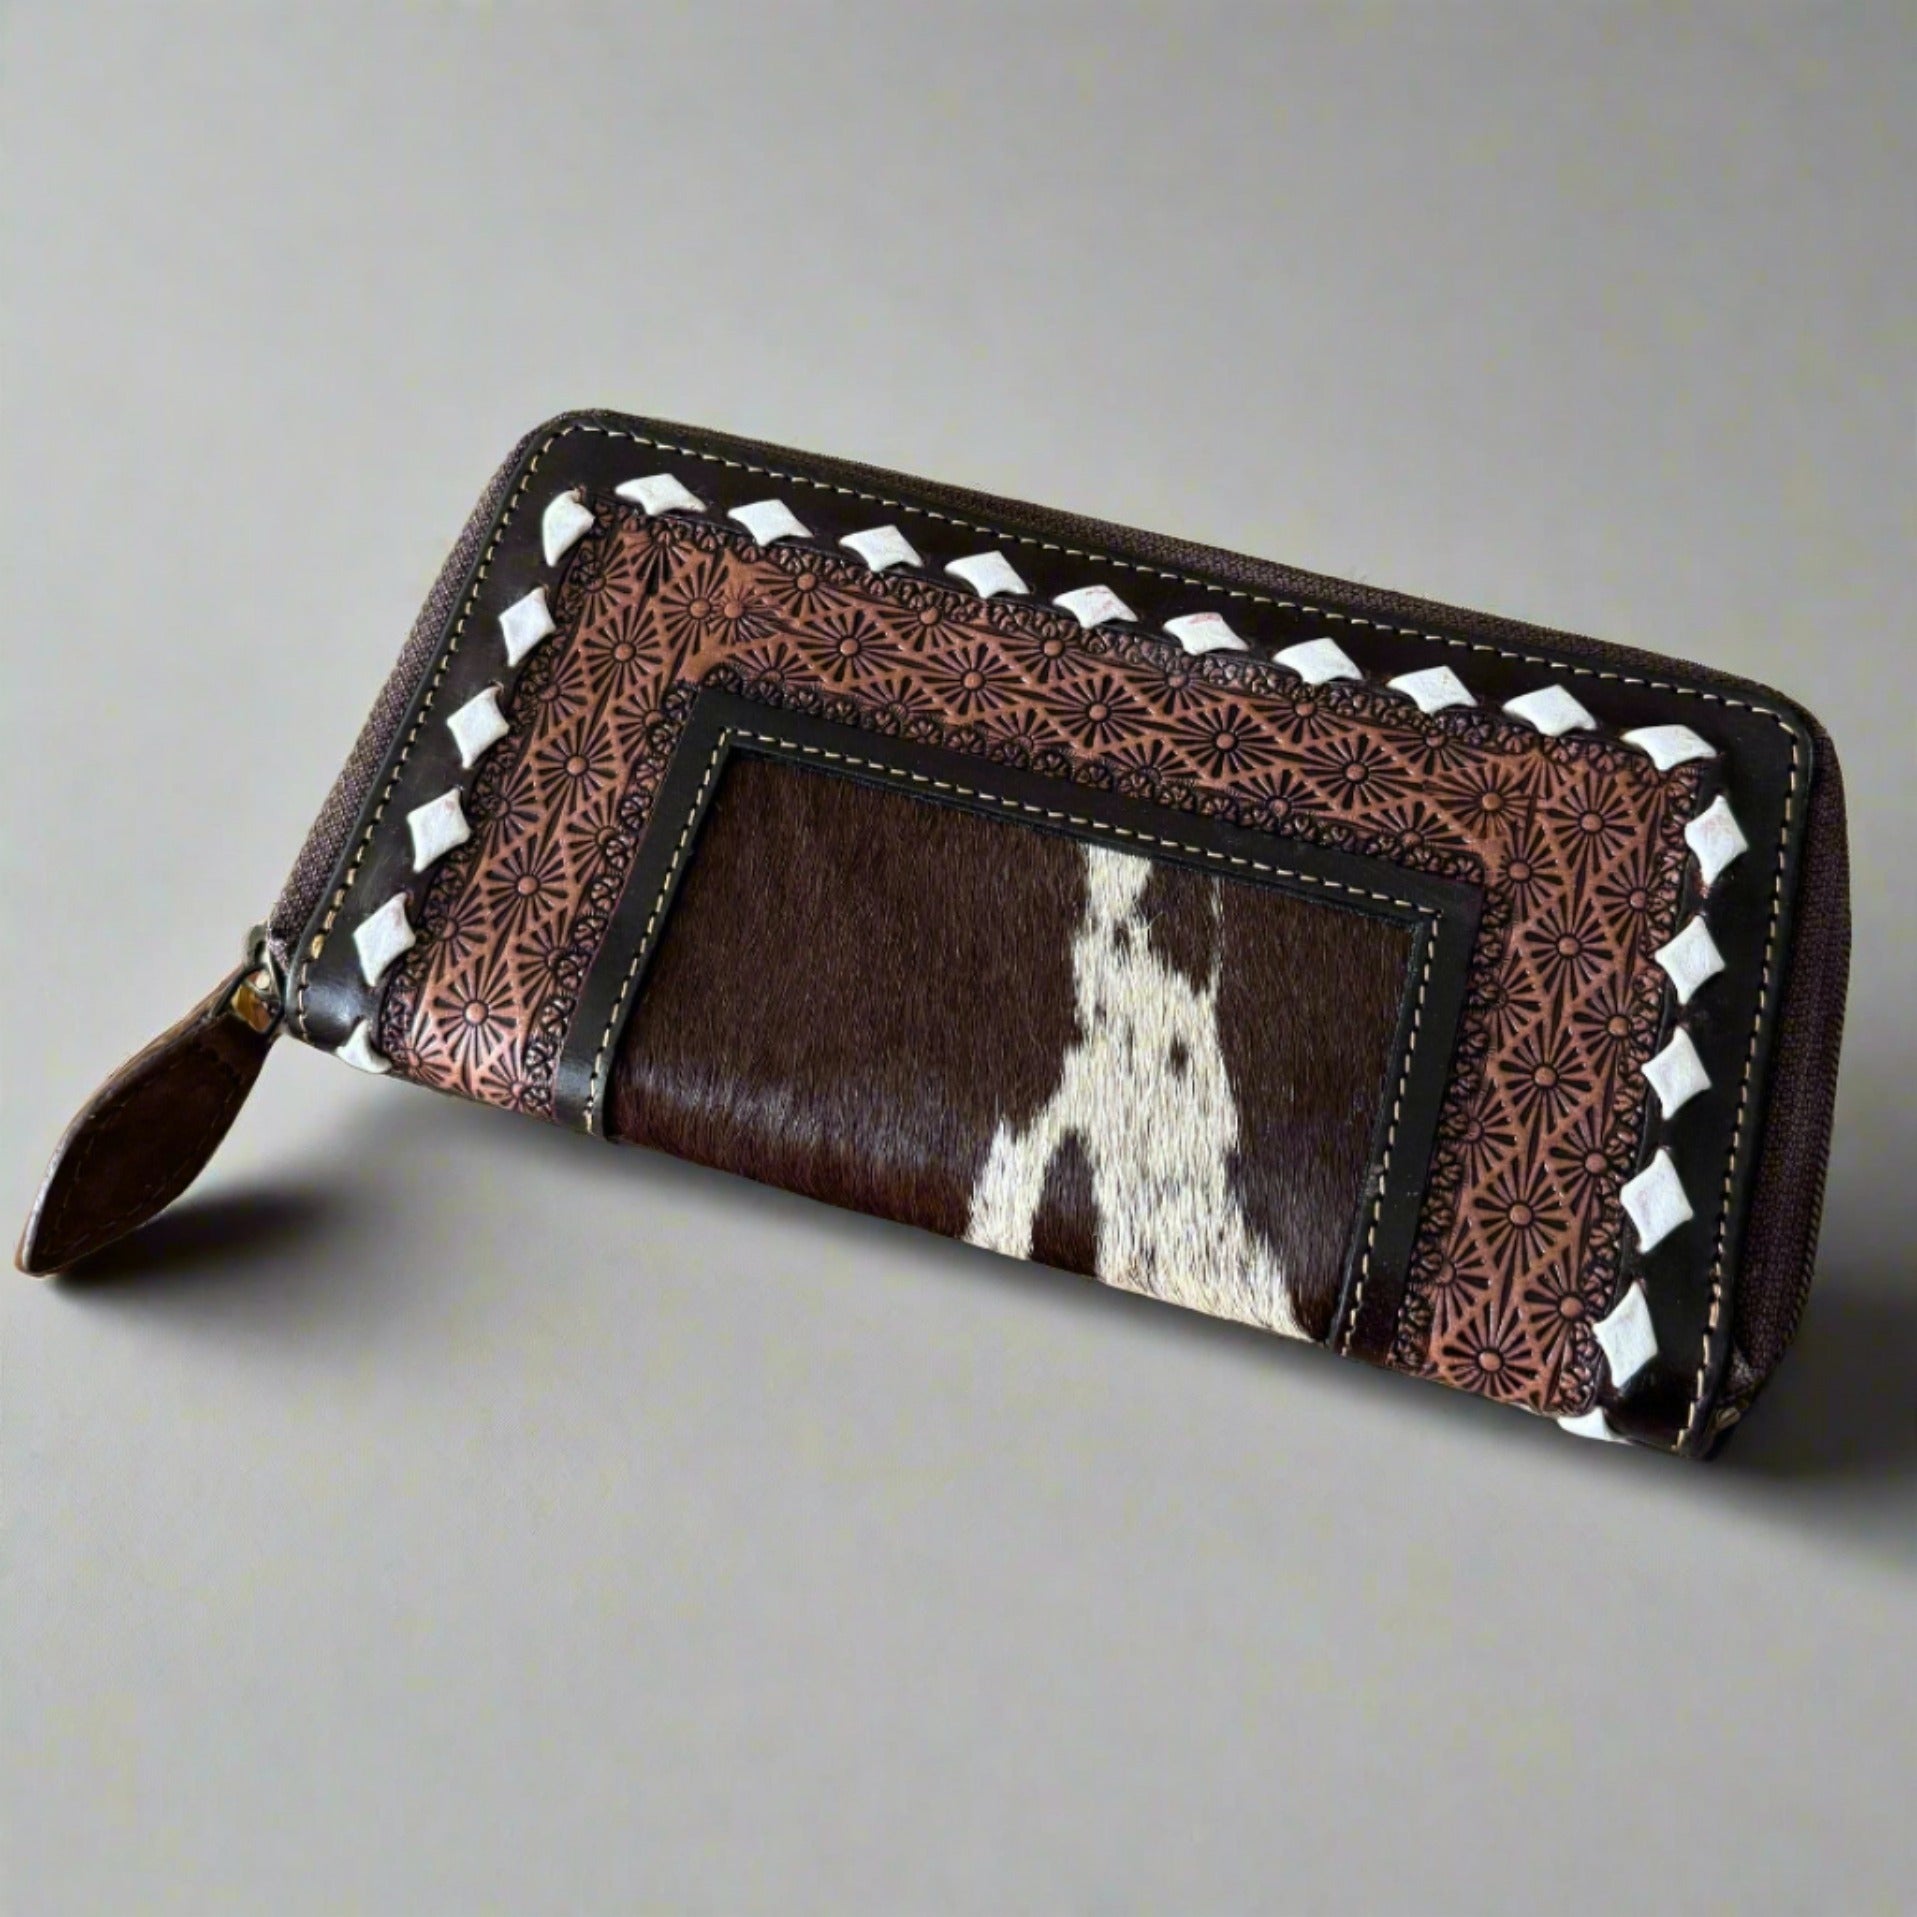 Boho Chic Cowhide Leather Zip Wallet Clutch